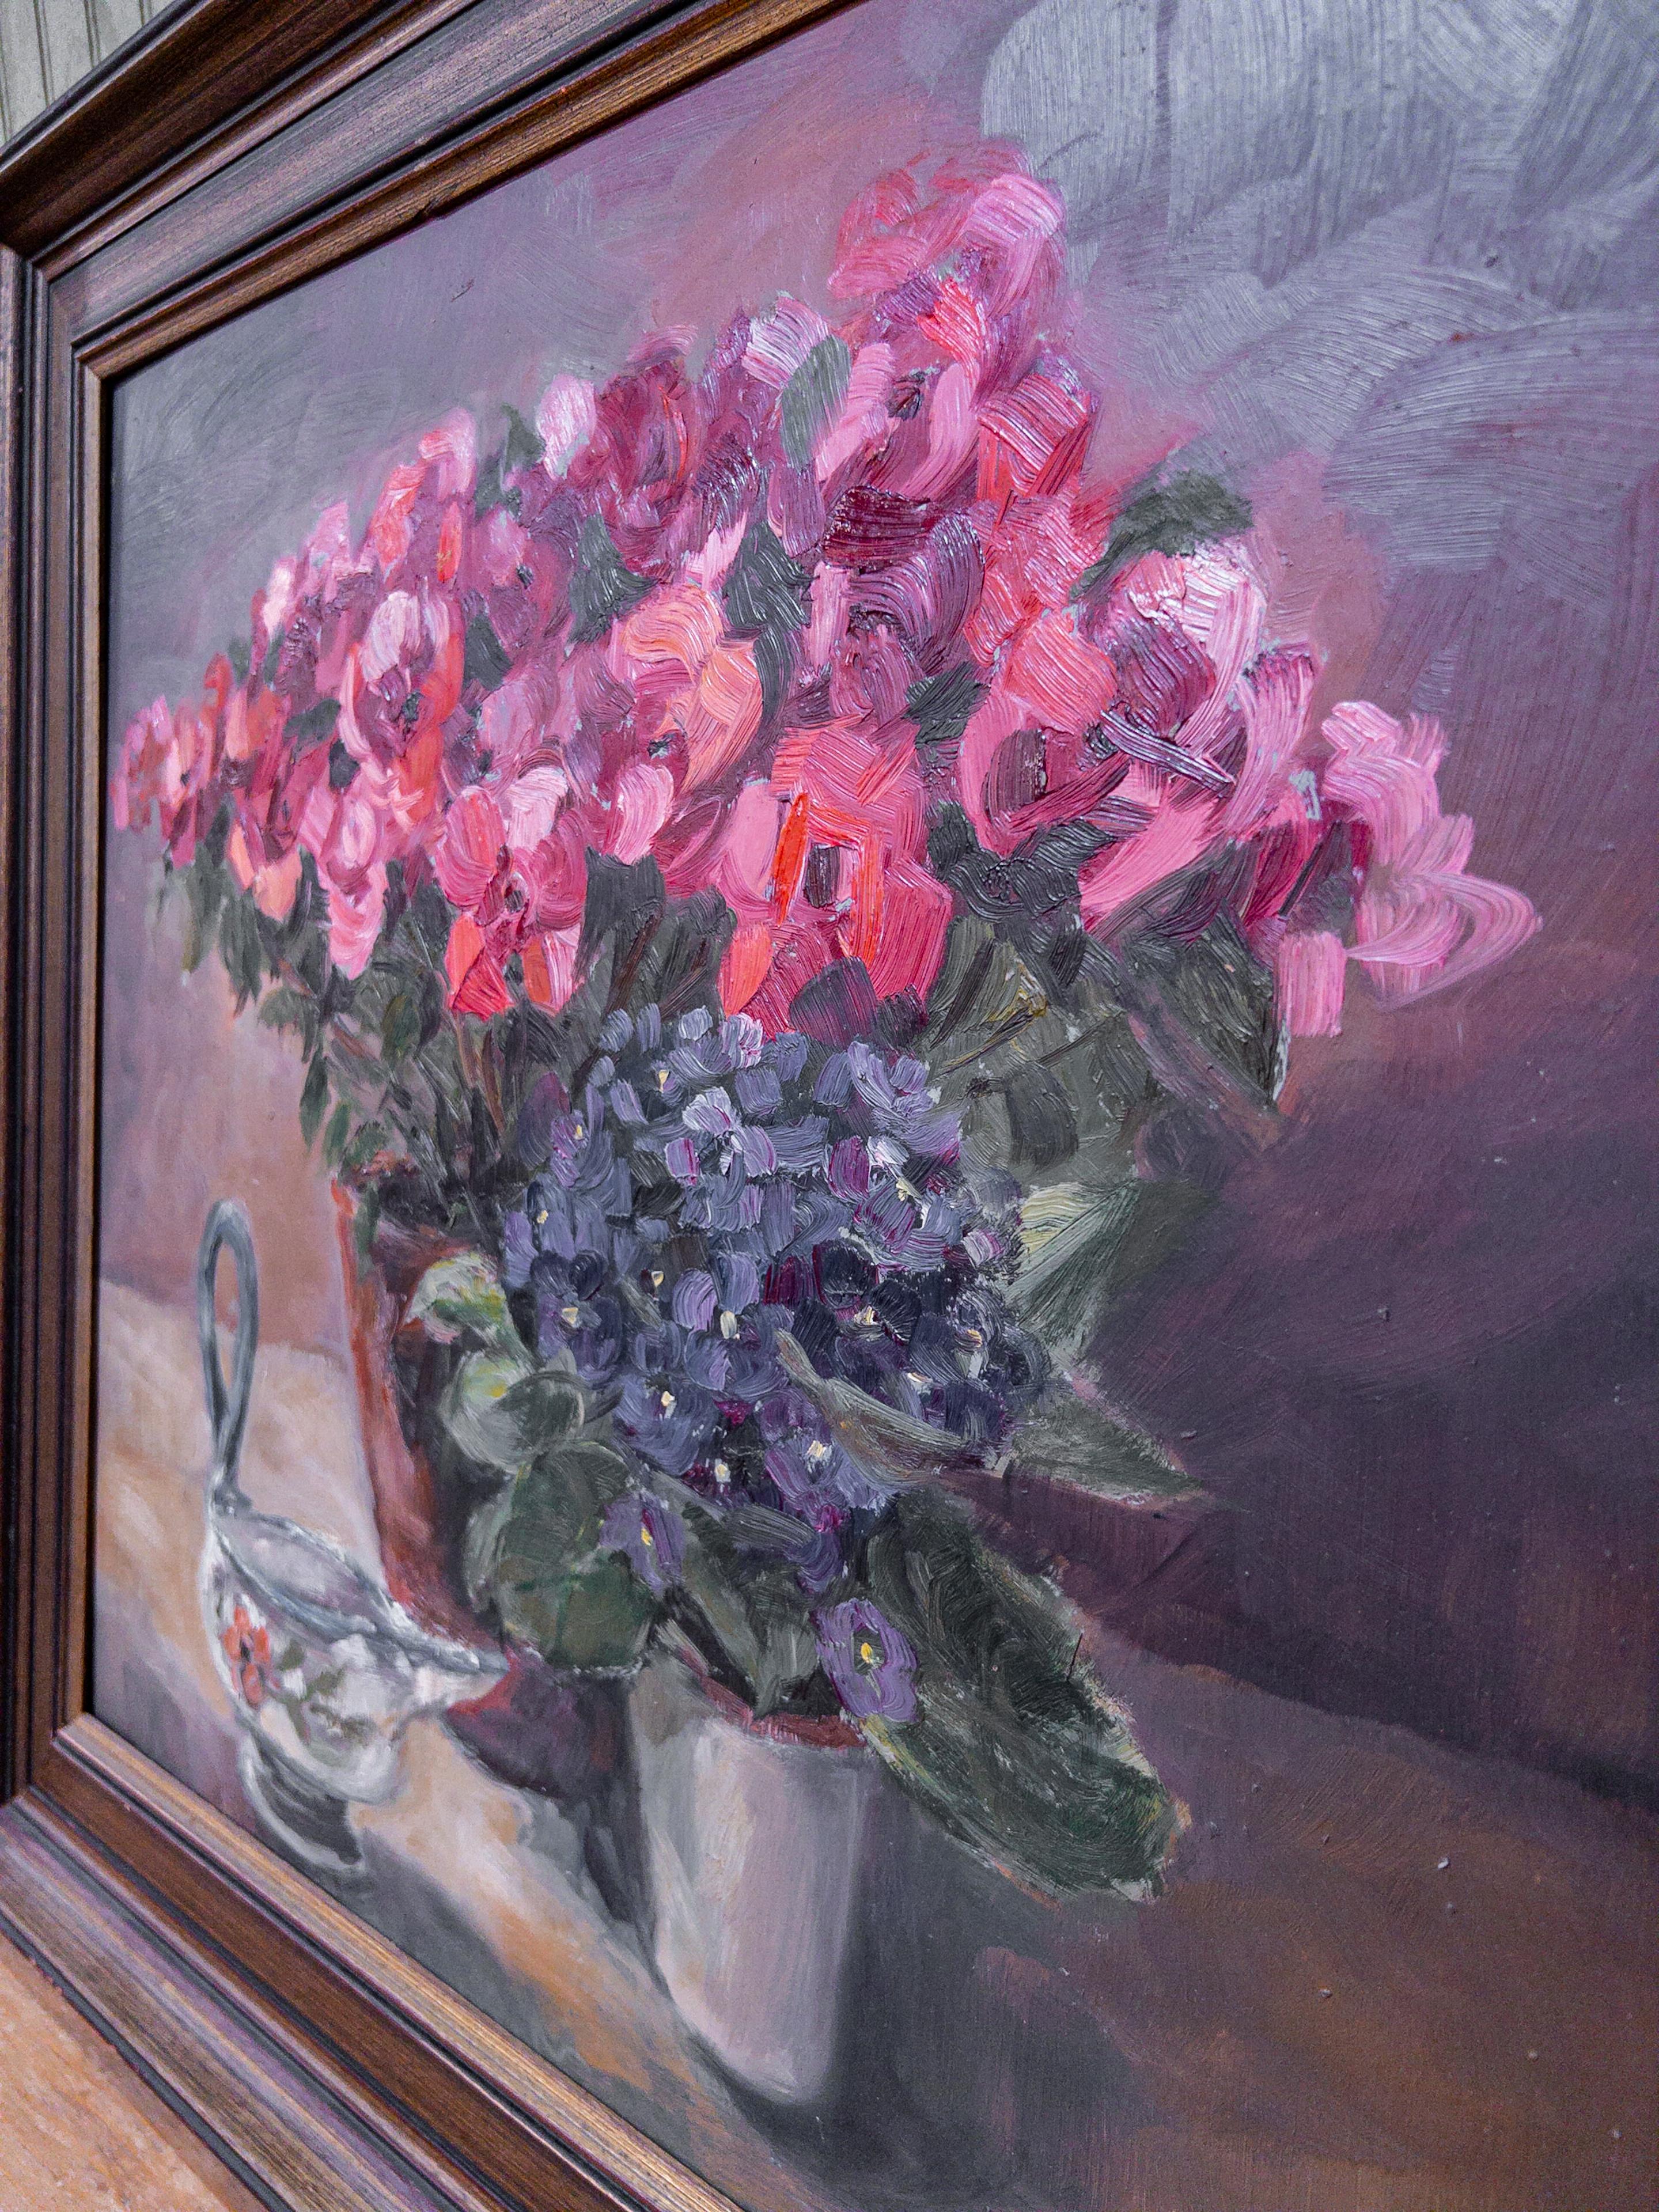 French Oil Painting on Canvas of Violets.
Floral still life oil painting on canvas in a stained wooden frame.